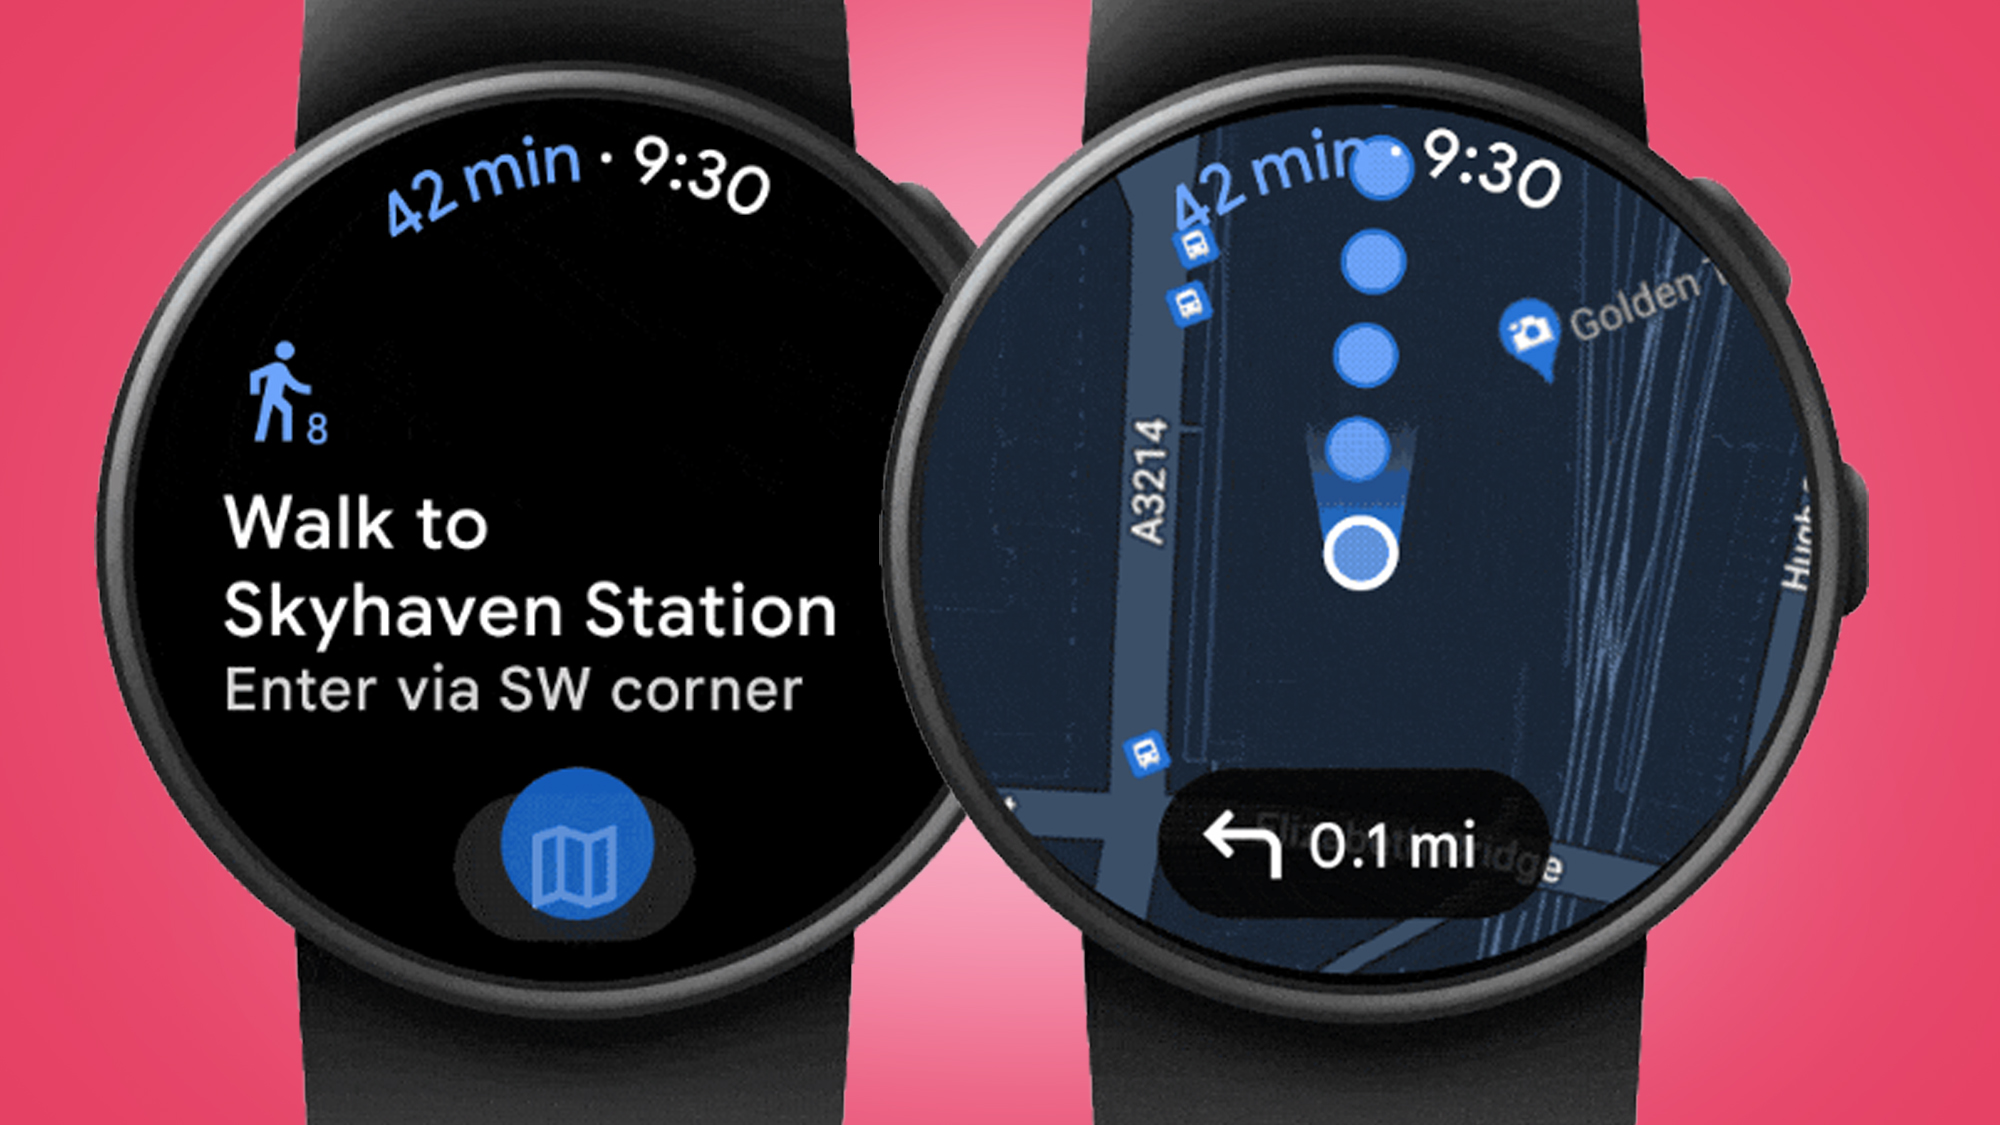 Two Wear OS watches on a pink background showing Google Maps directions